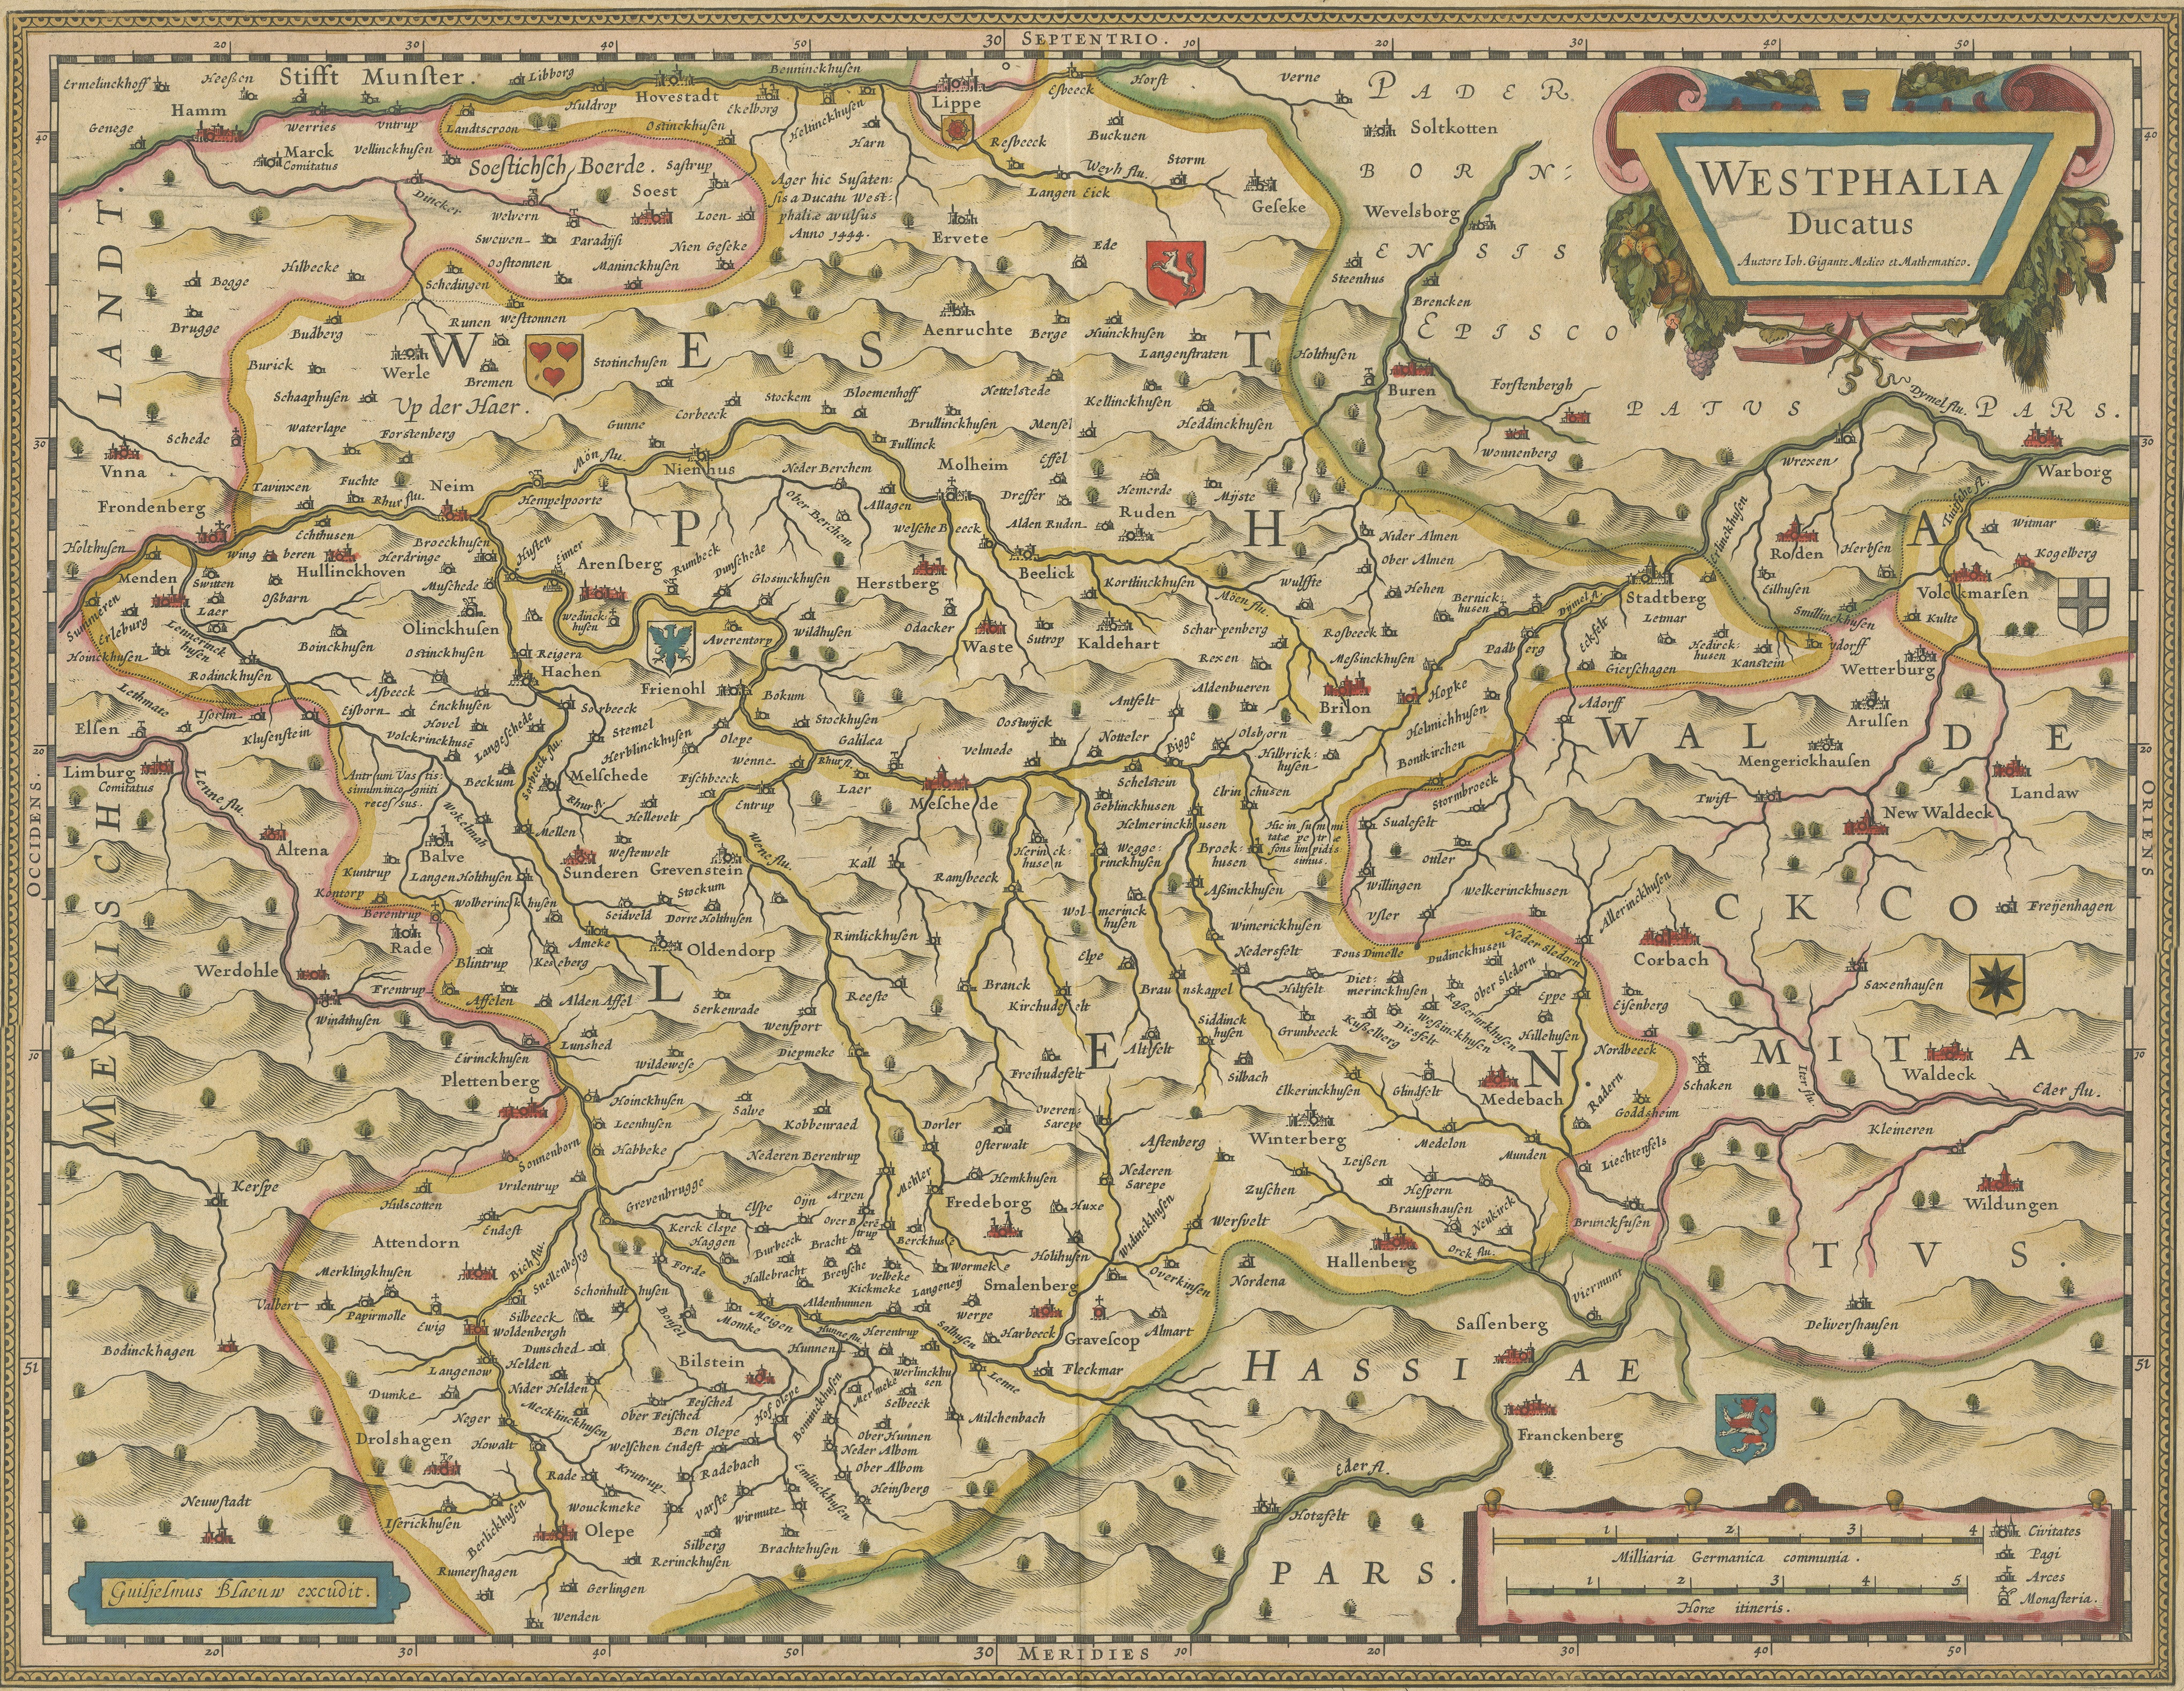 Original antique map titled 'Westphalia Ducatus'. Fine map of the Duchy of Westphalia, Germany. The map is centered on Meschede and includes Arensberg, Beelick, and Brilon. Published by G. Blaeu, circa 1640.